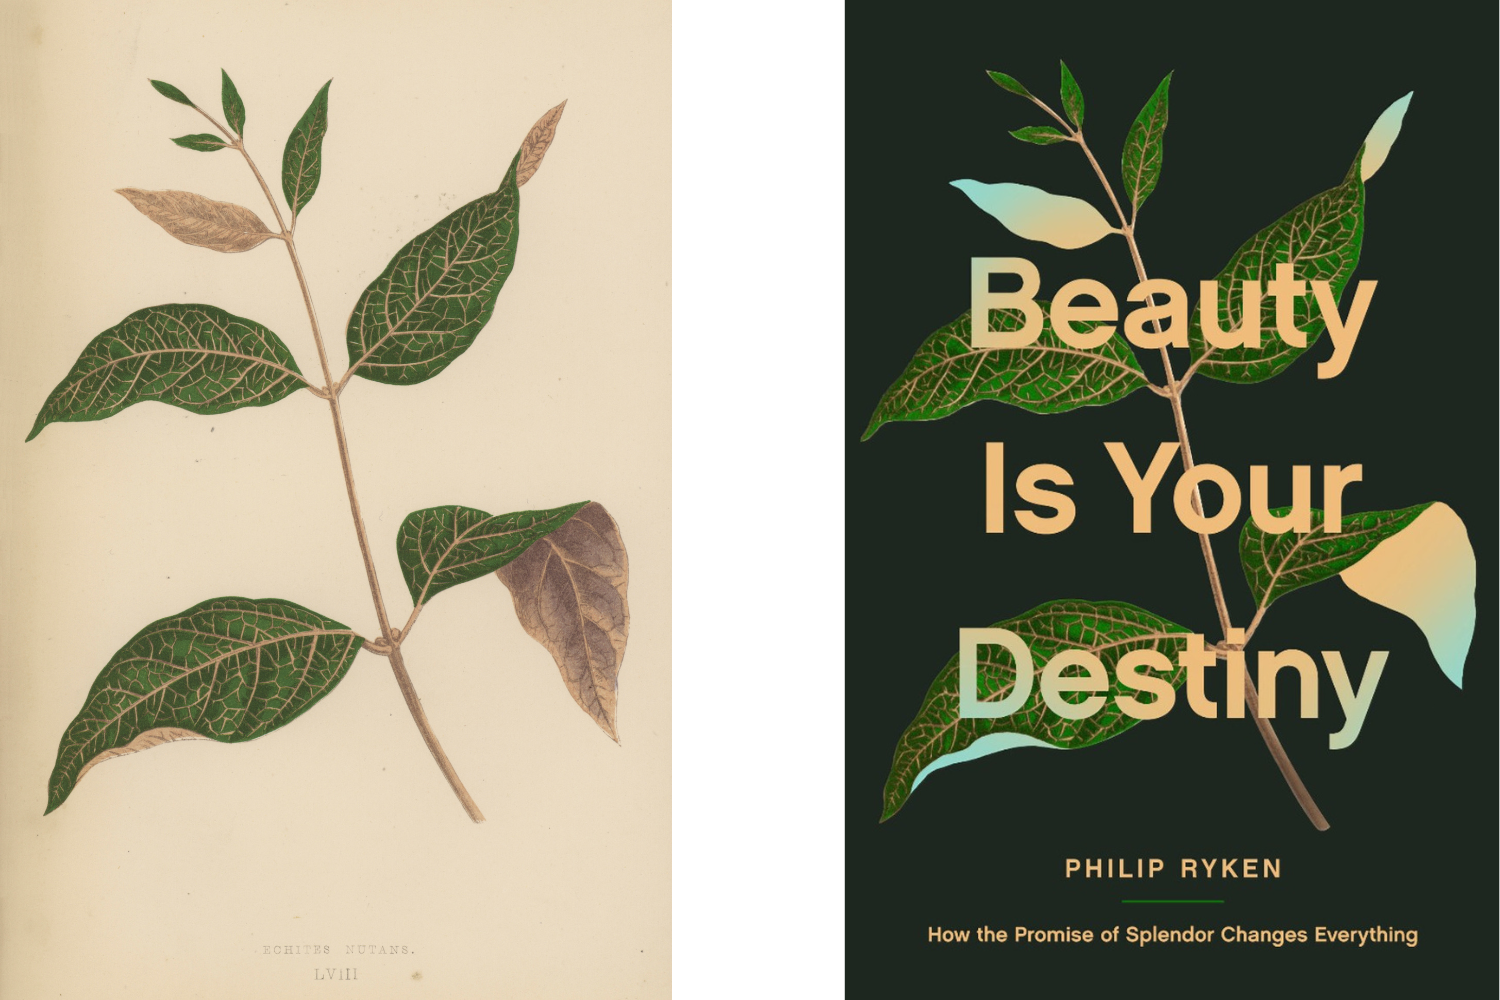 Beauty is Your Destiny, Tim Green Book Cover Design